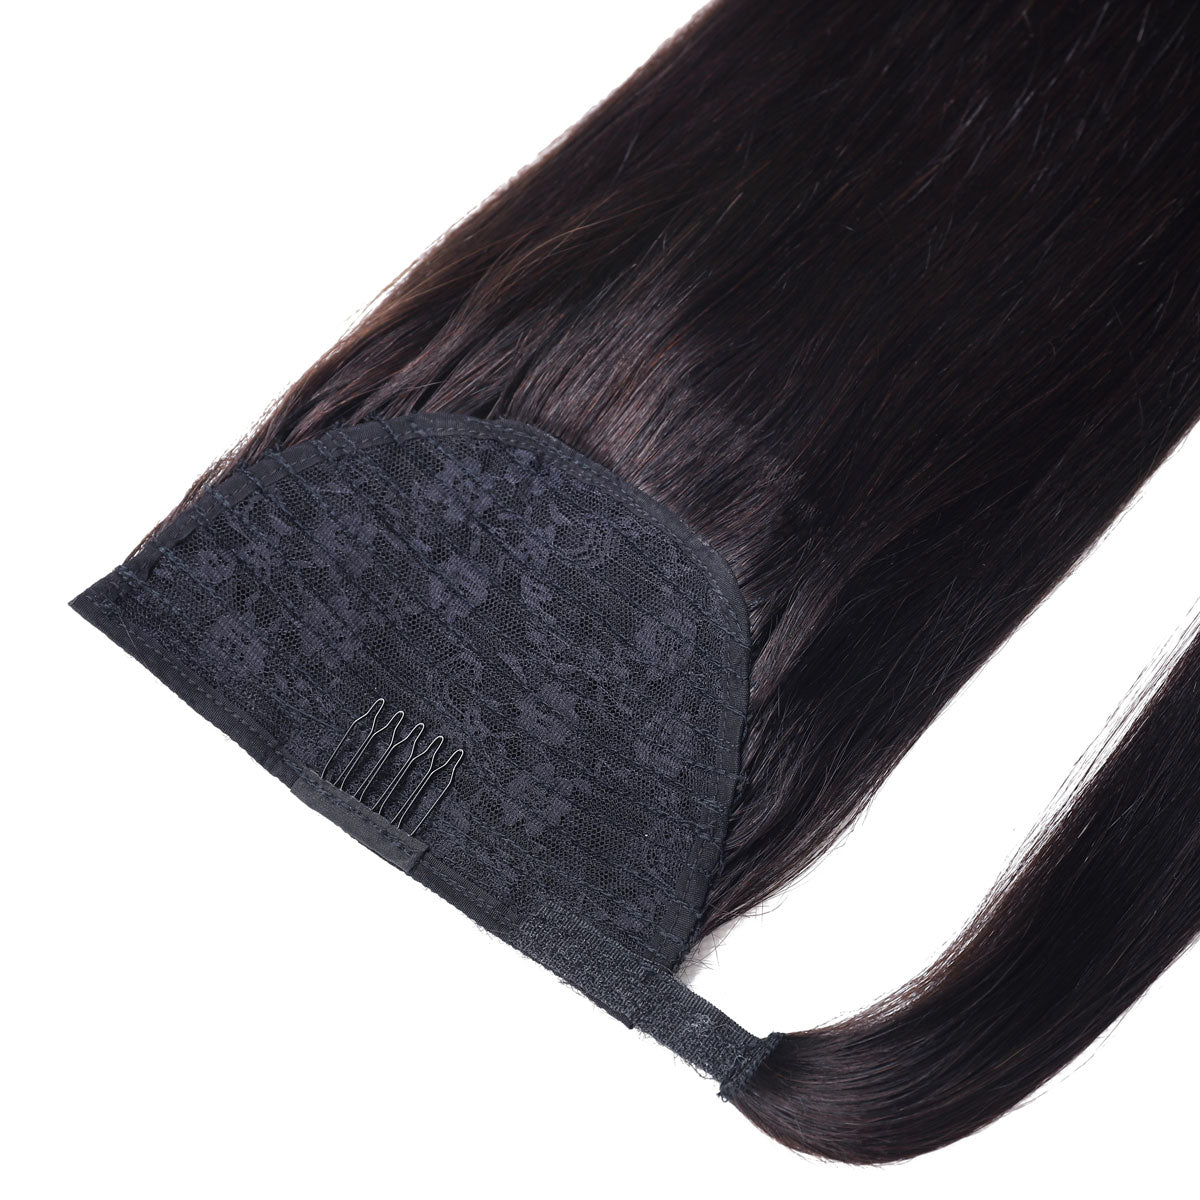 Ponytail Hair Extensions #1C Midnight Brown